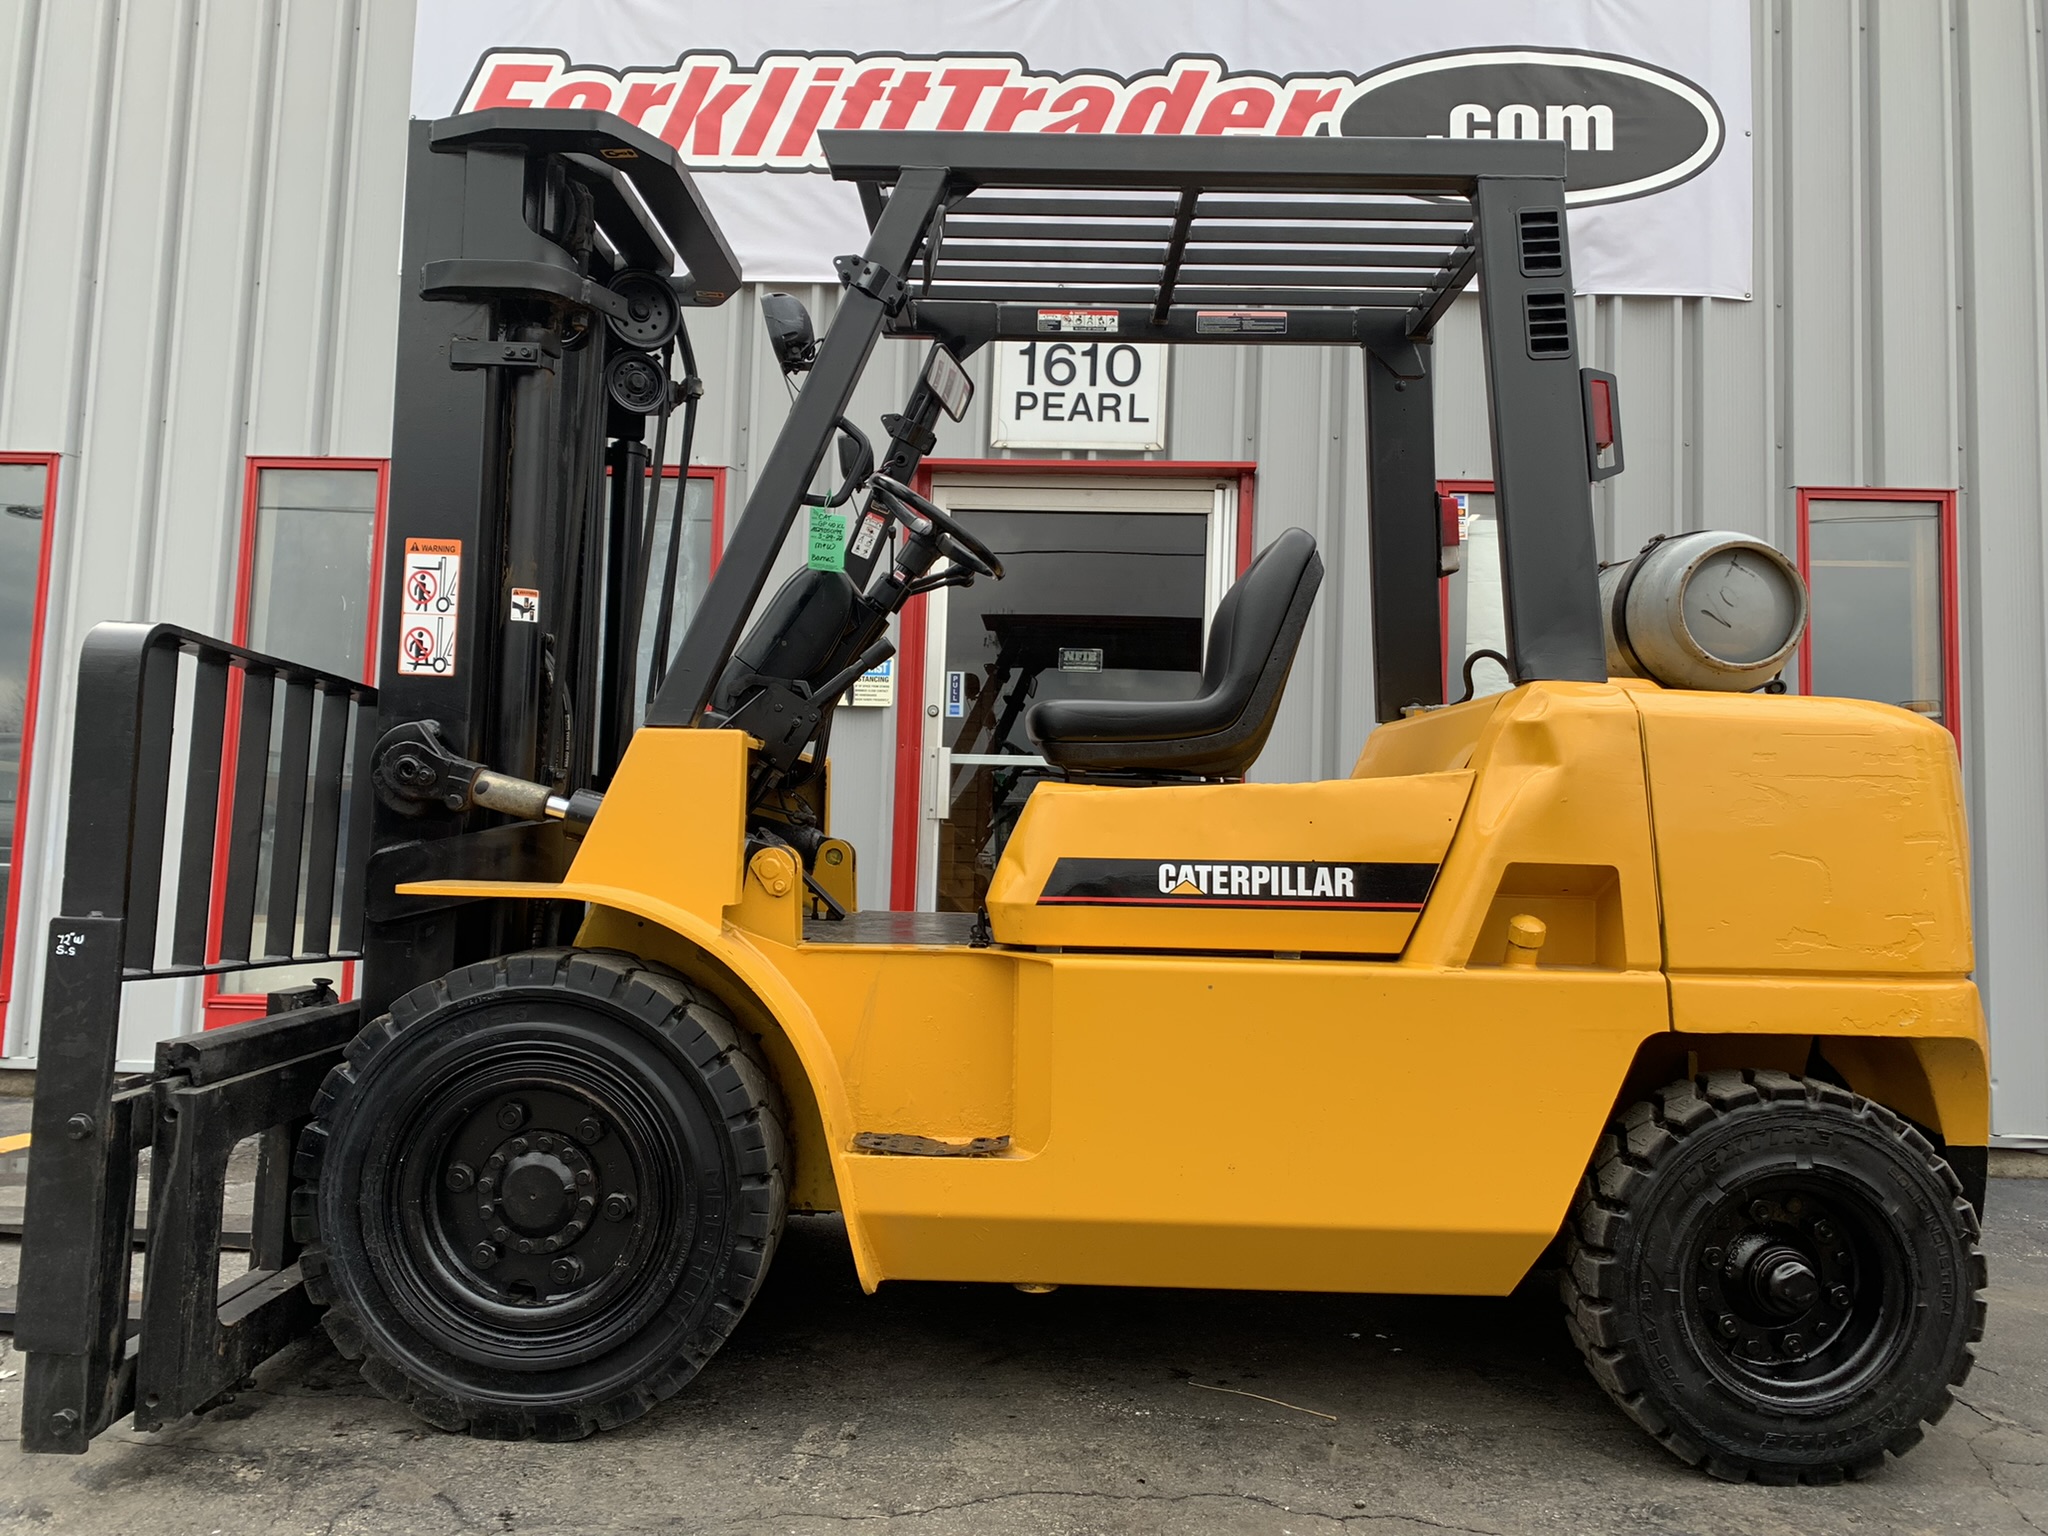 187" lift height yellow caterpillar forklift for sale